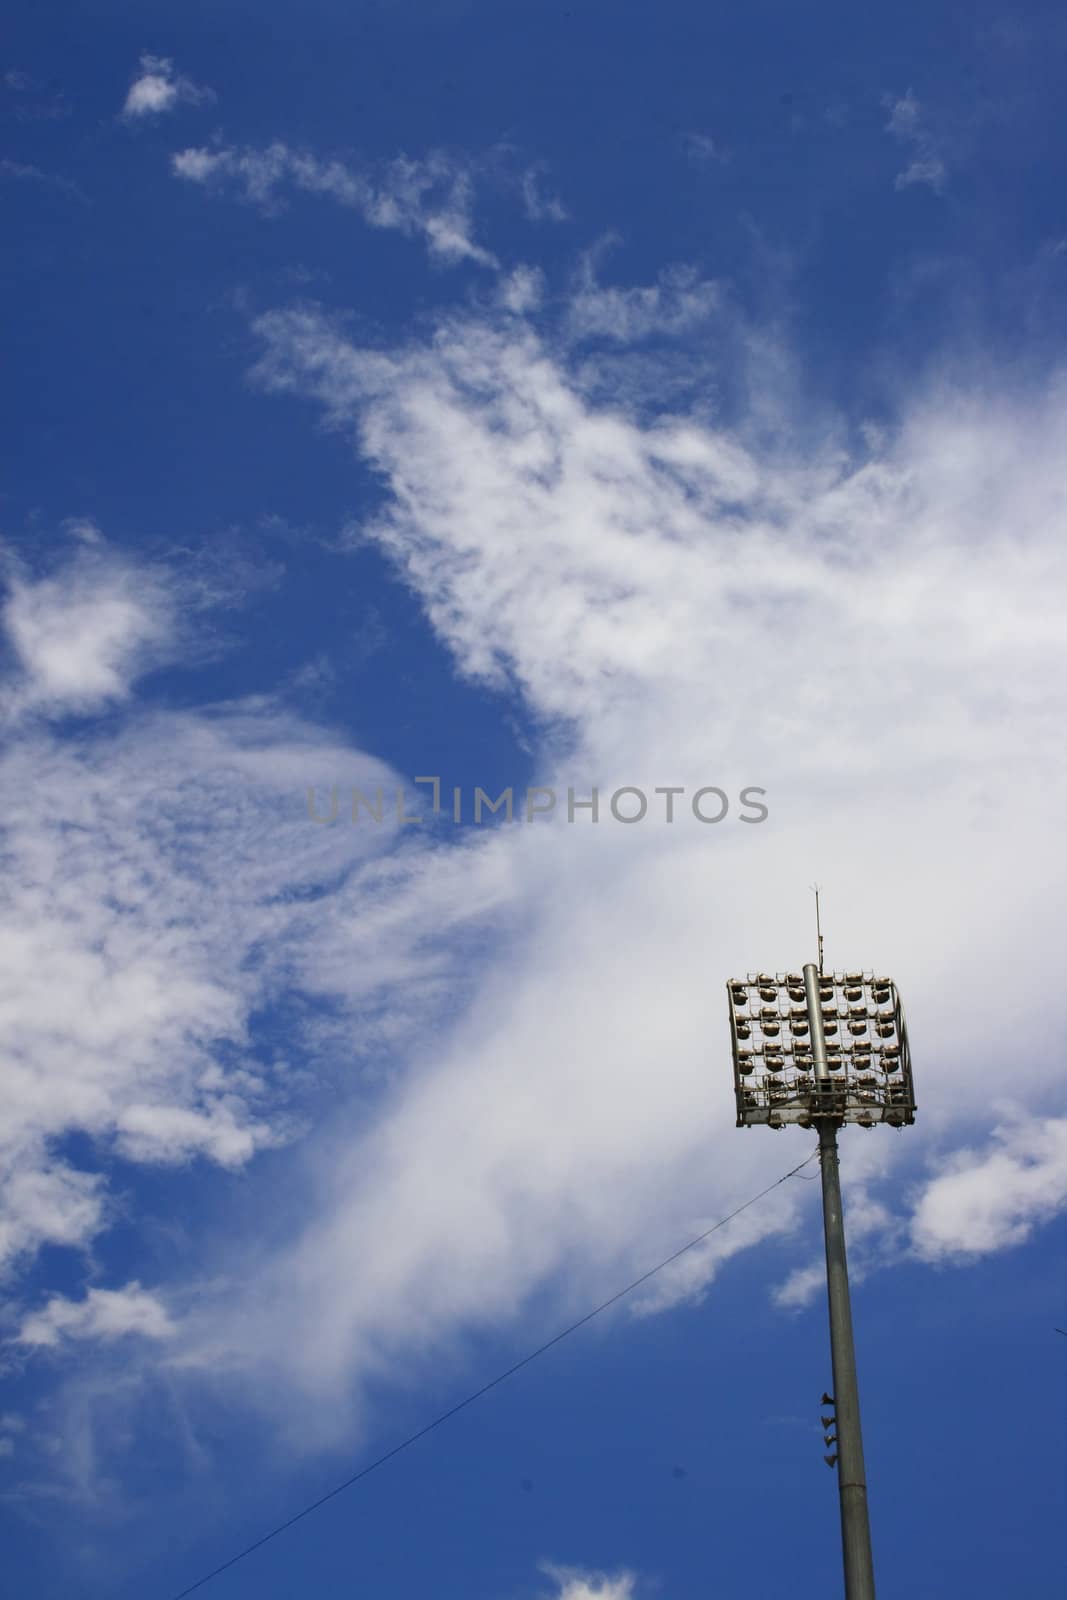 Blue sky and white clouds and a stadium spot light post at right hand corner.